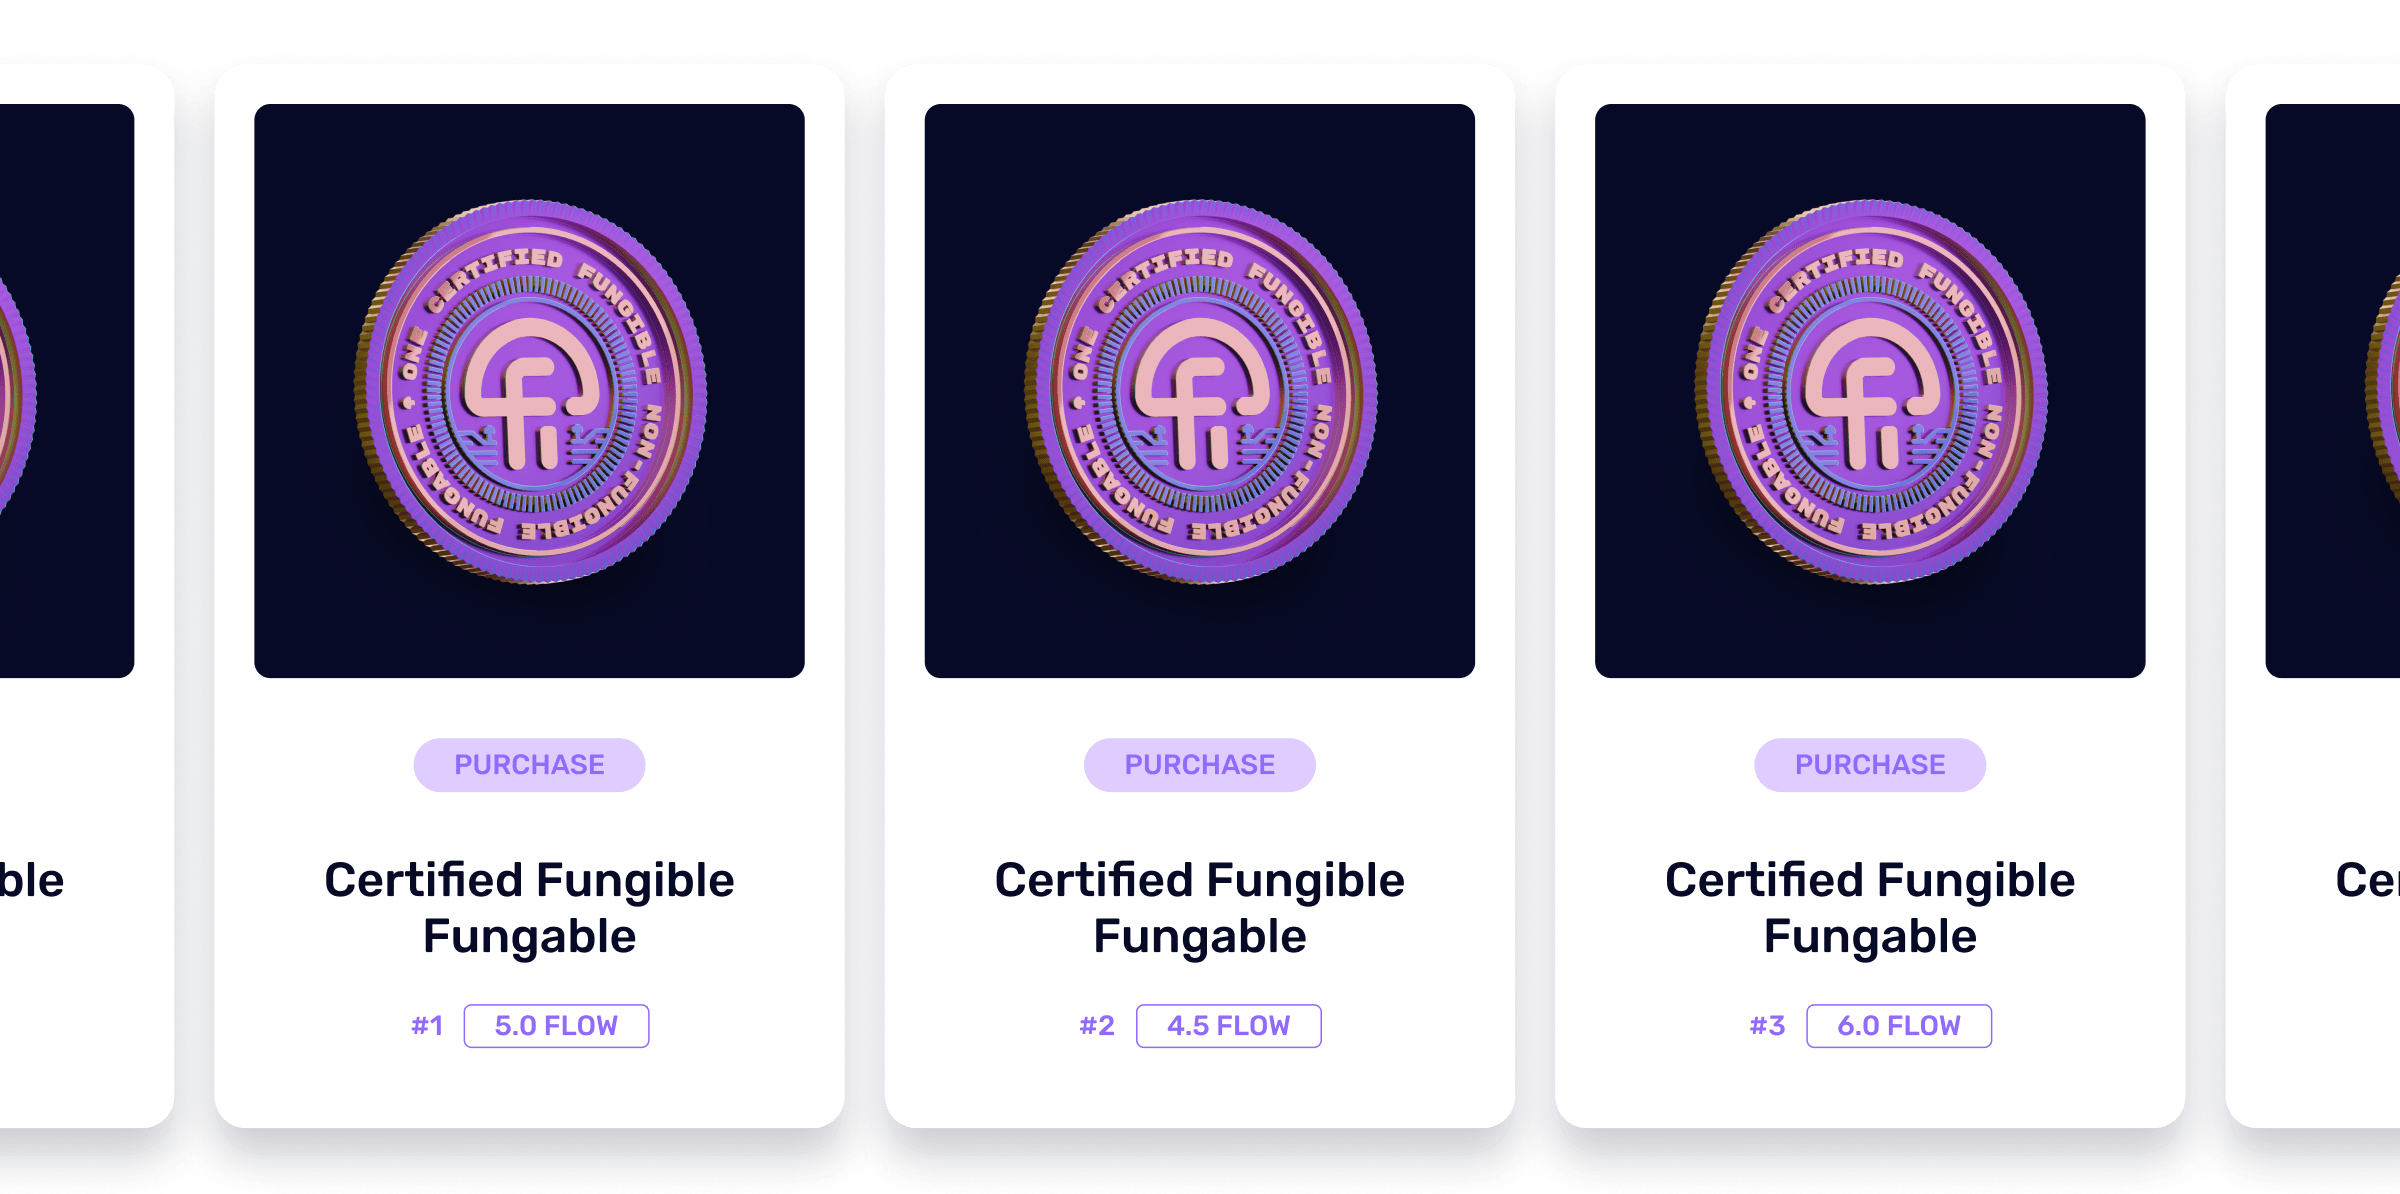 A mockup showcasing an endless row of fungible Fungables.